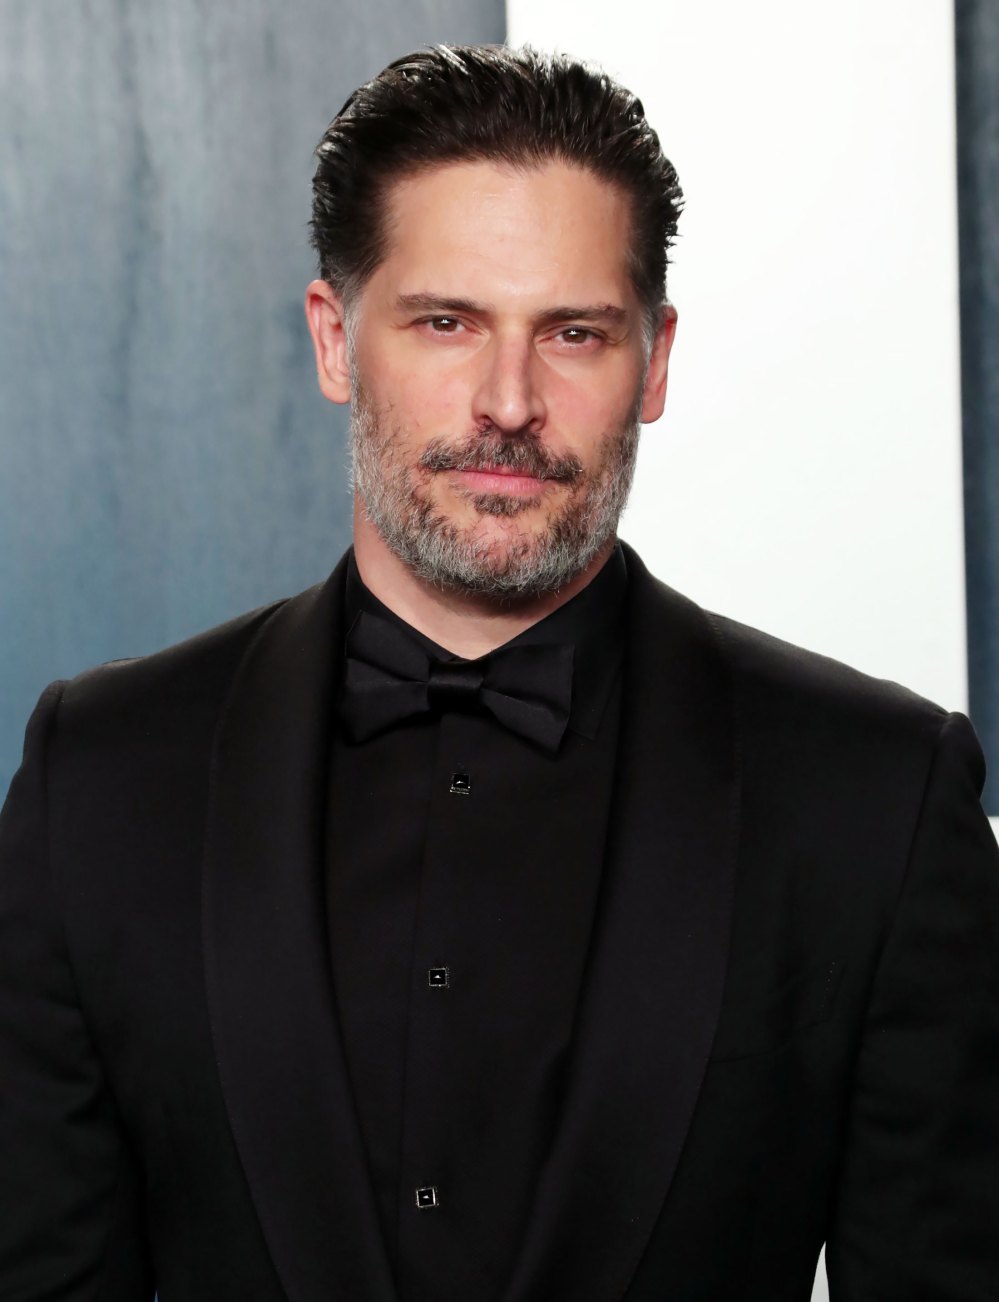 Joe Manganiello Debut a Blue Mohawk and Fans Have a Lot of Thoughts